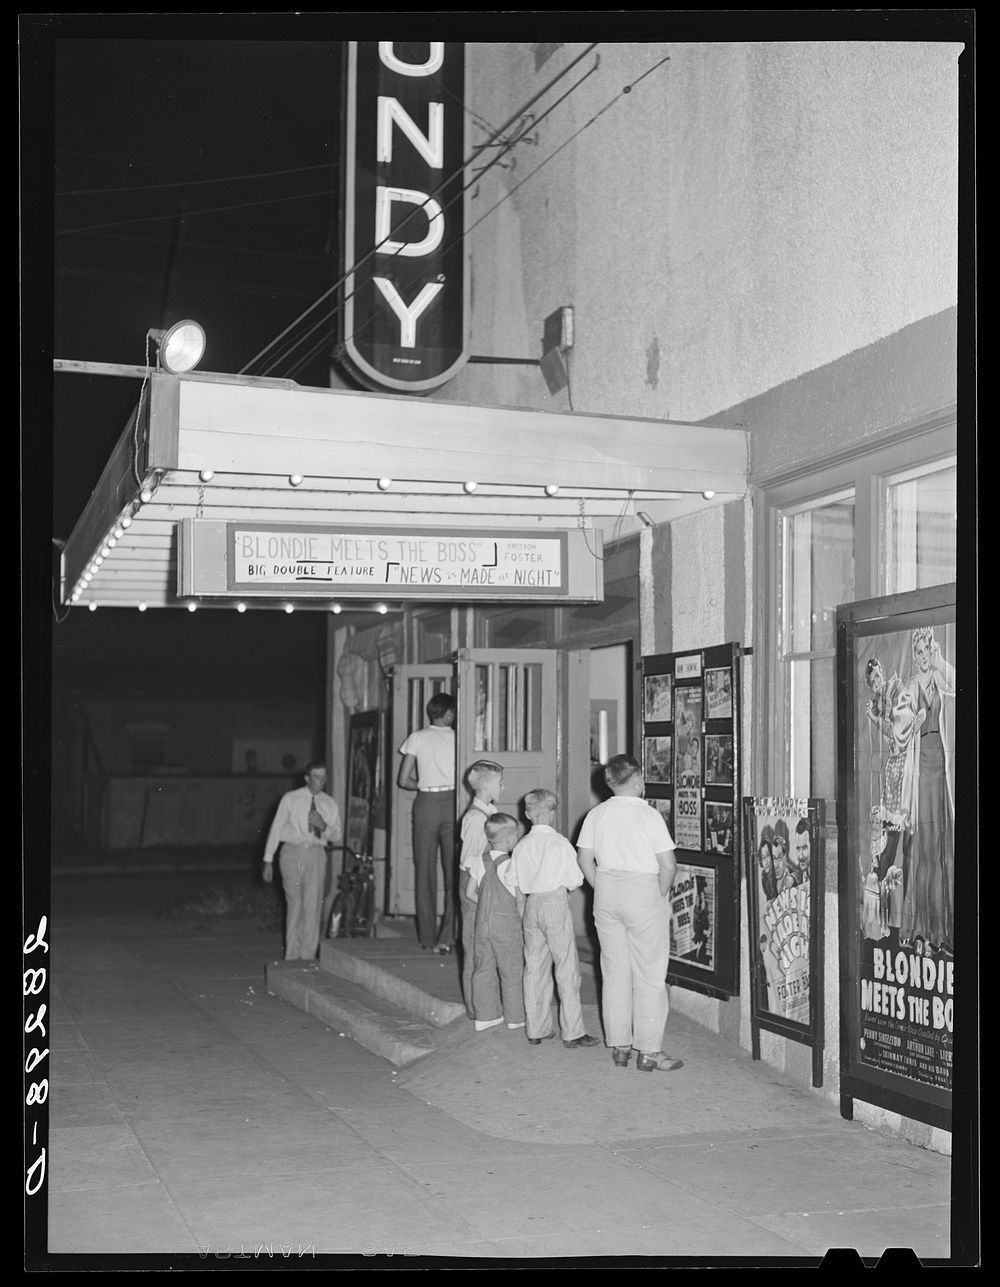 Motion picture theatre. Grundy Center, Iowa. Sourced from the Library of Congress.